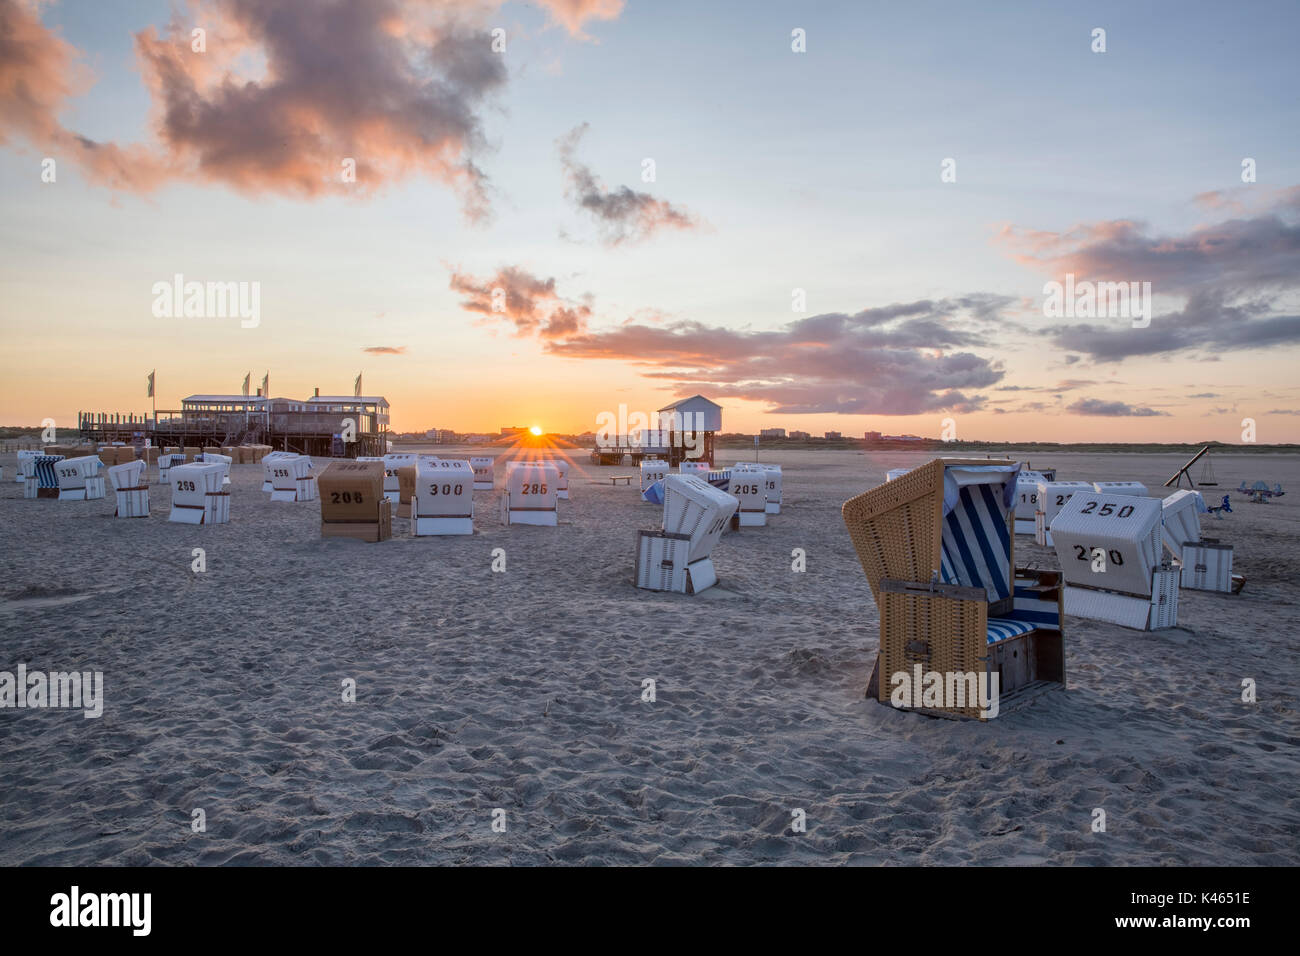 Traditional beach baskets or hooded beach chairs at nothern Germany Stock Photo